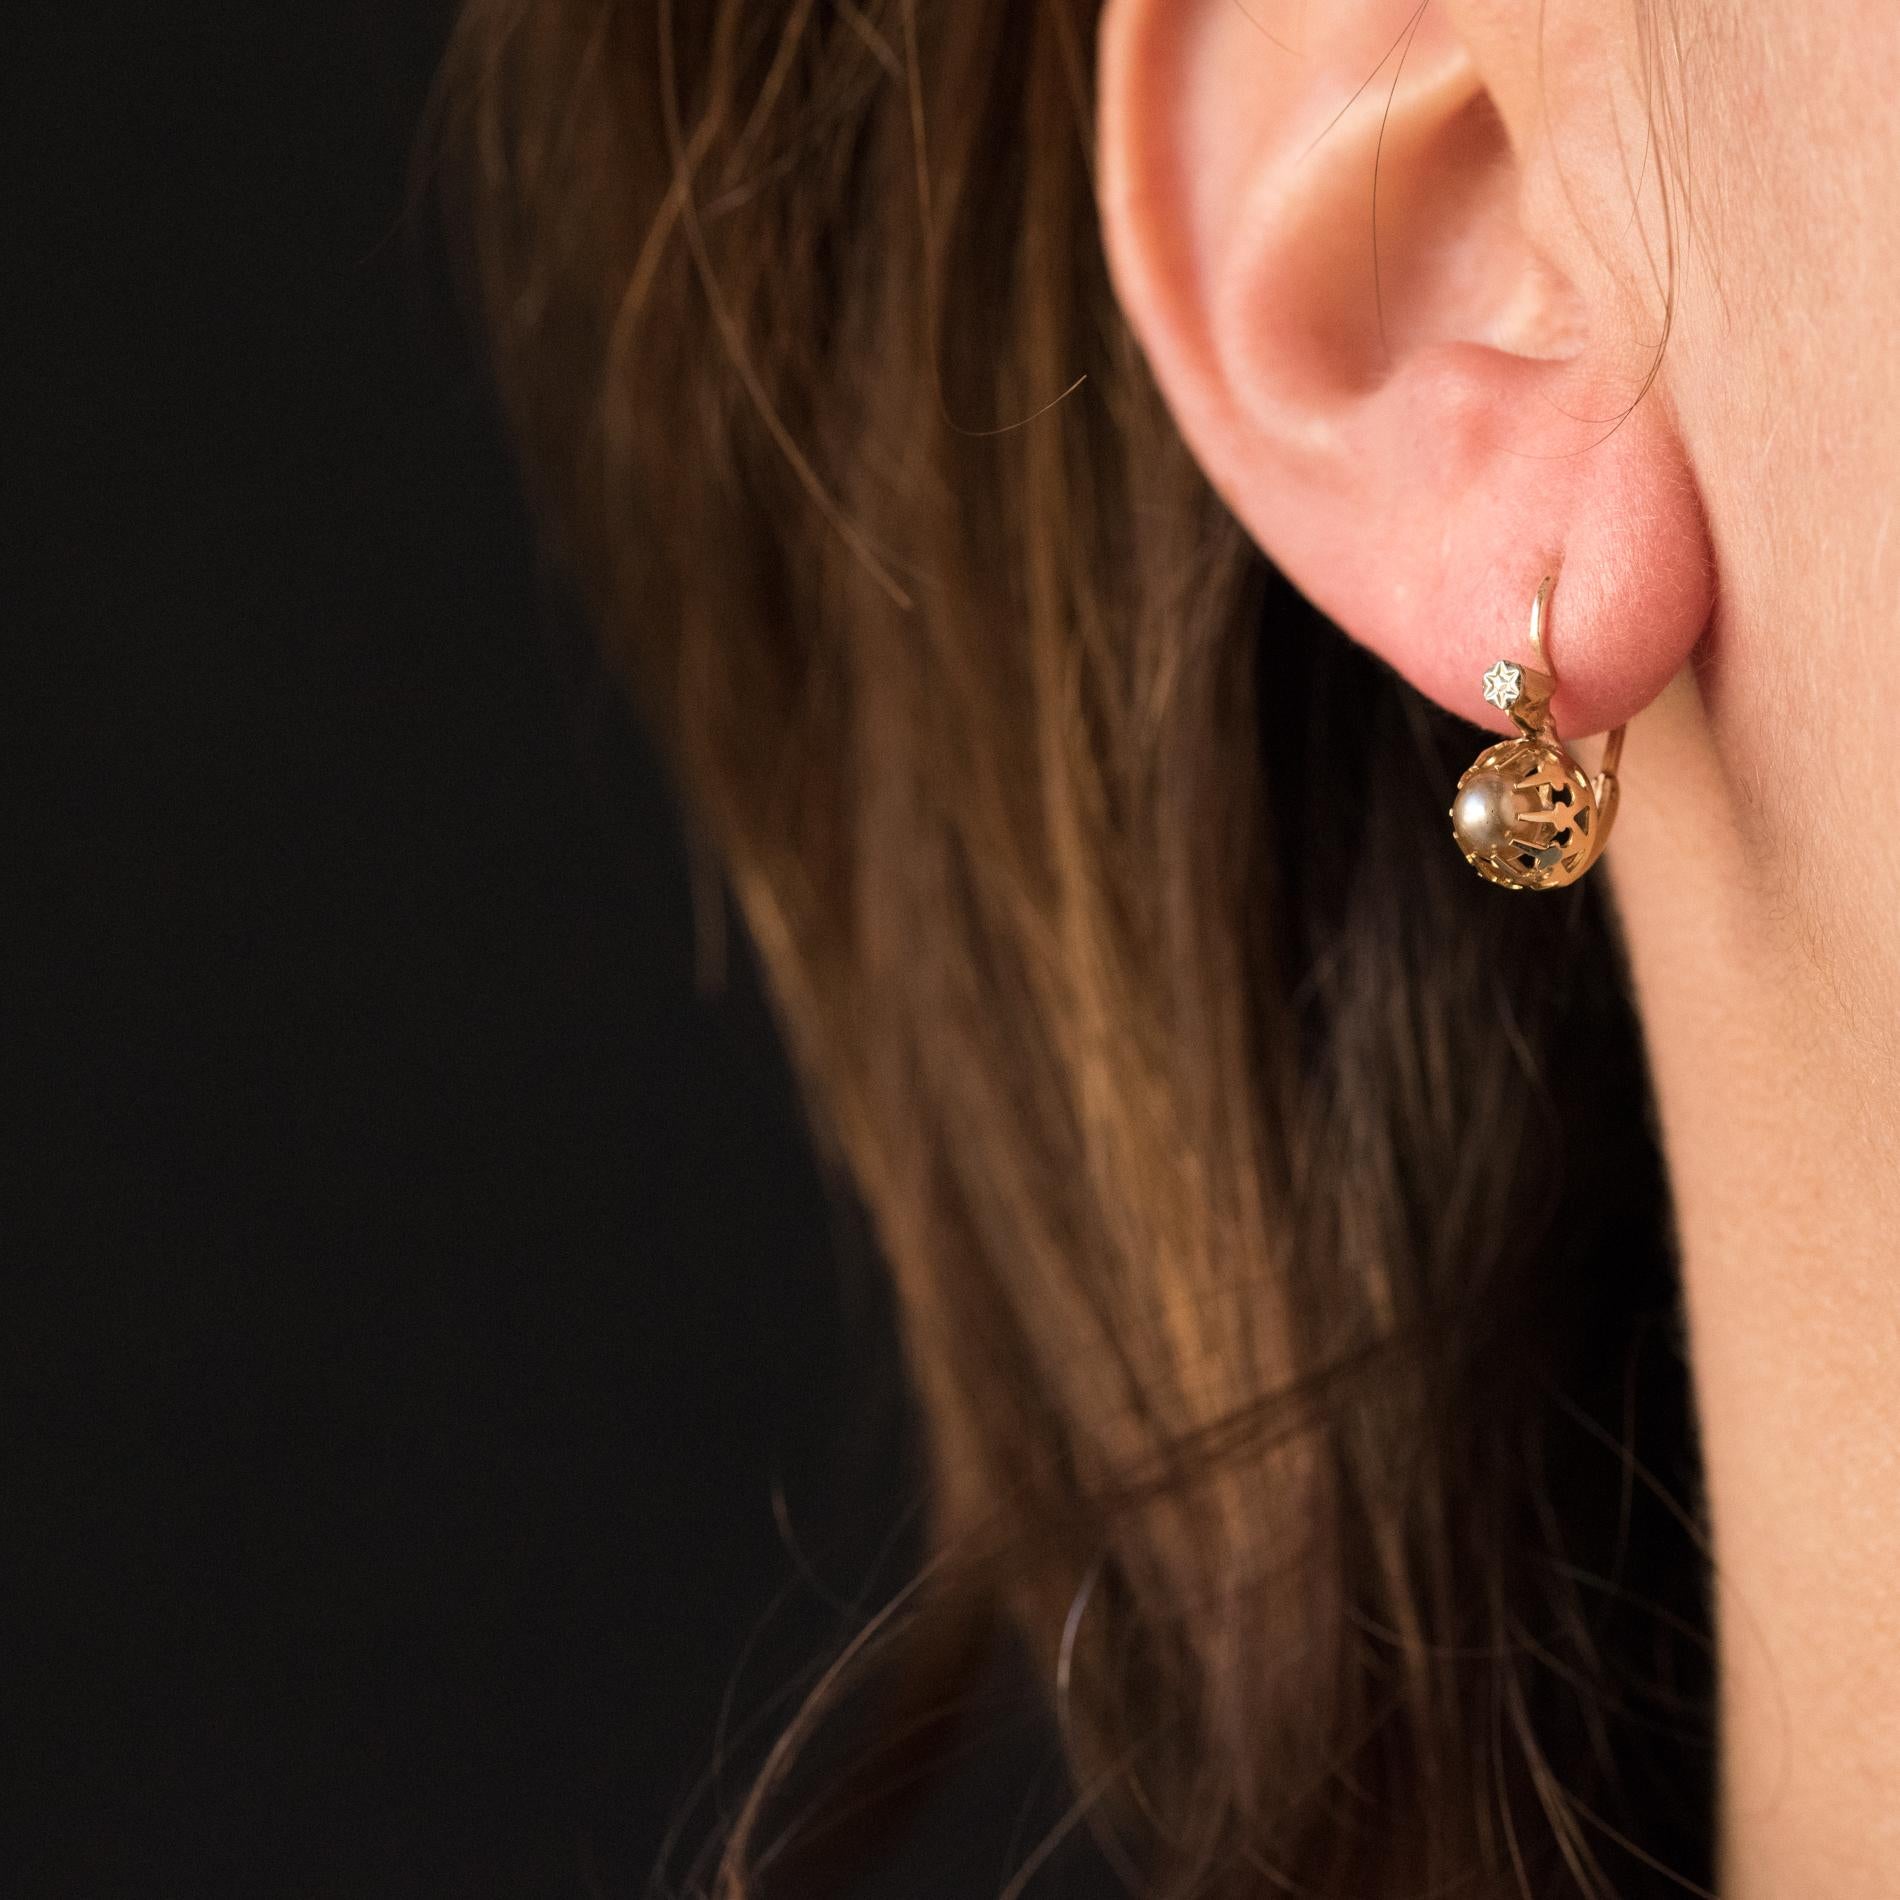 Earrings in 18 karats yellow gold, eagle's head hallmark.
Lovely sllepers earrings, they are set with claws of a cultured pearl. The claws have a lily flower pattern and are surmounted by a small engraved white gold pattern. The clasp is from the